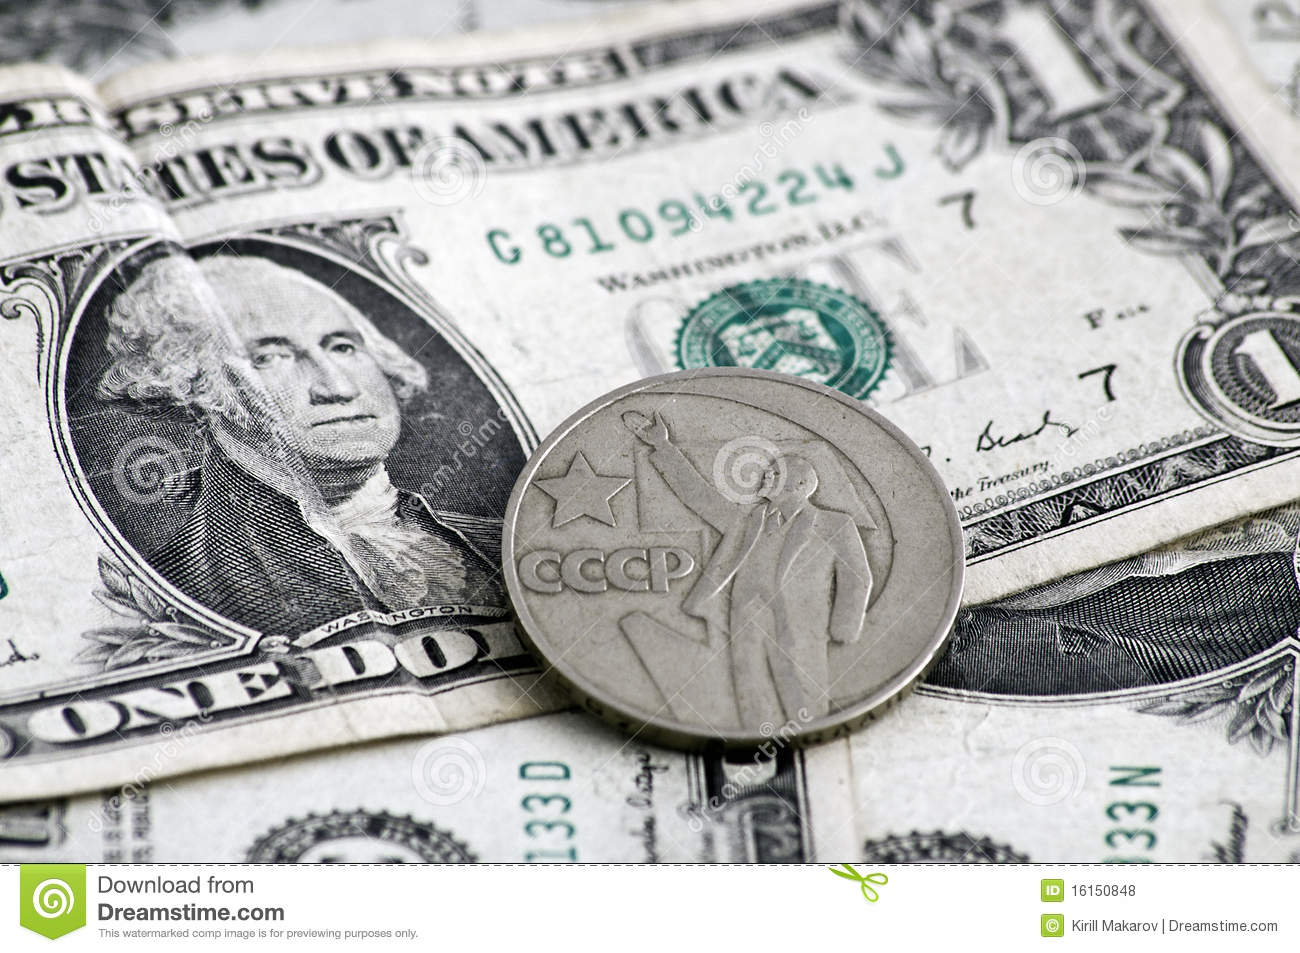 The  1 Dollar Bill With The Soviet Coin On The Top Royalty Free Stock